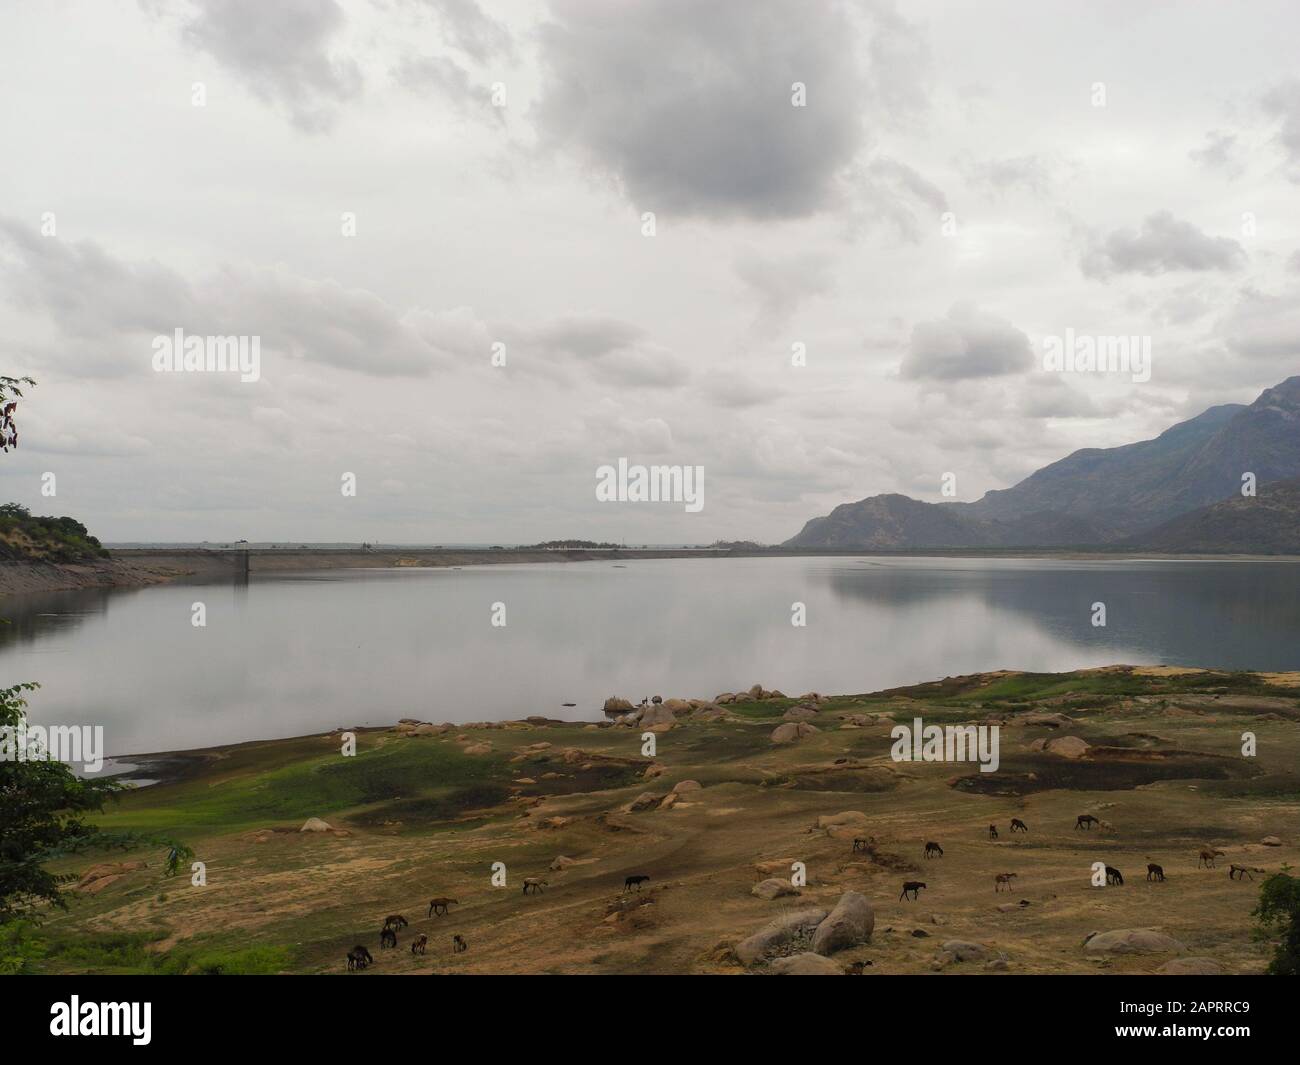 Landscape with lake and animals in the reserve Valparai, India, Tamil Nadu Stock Photo